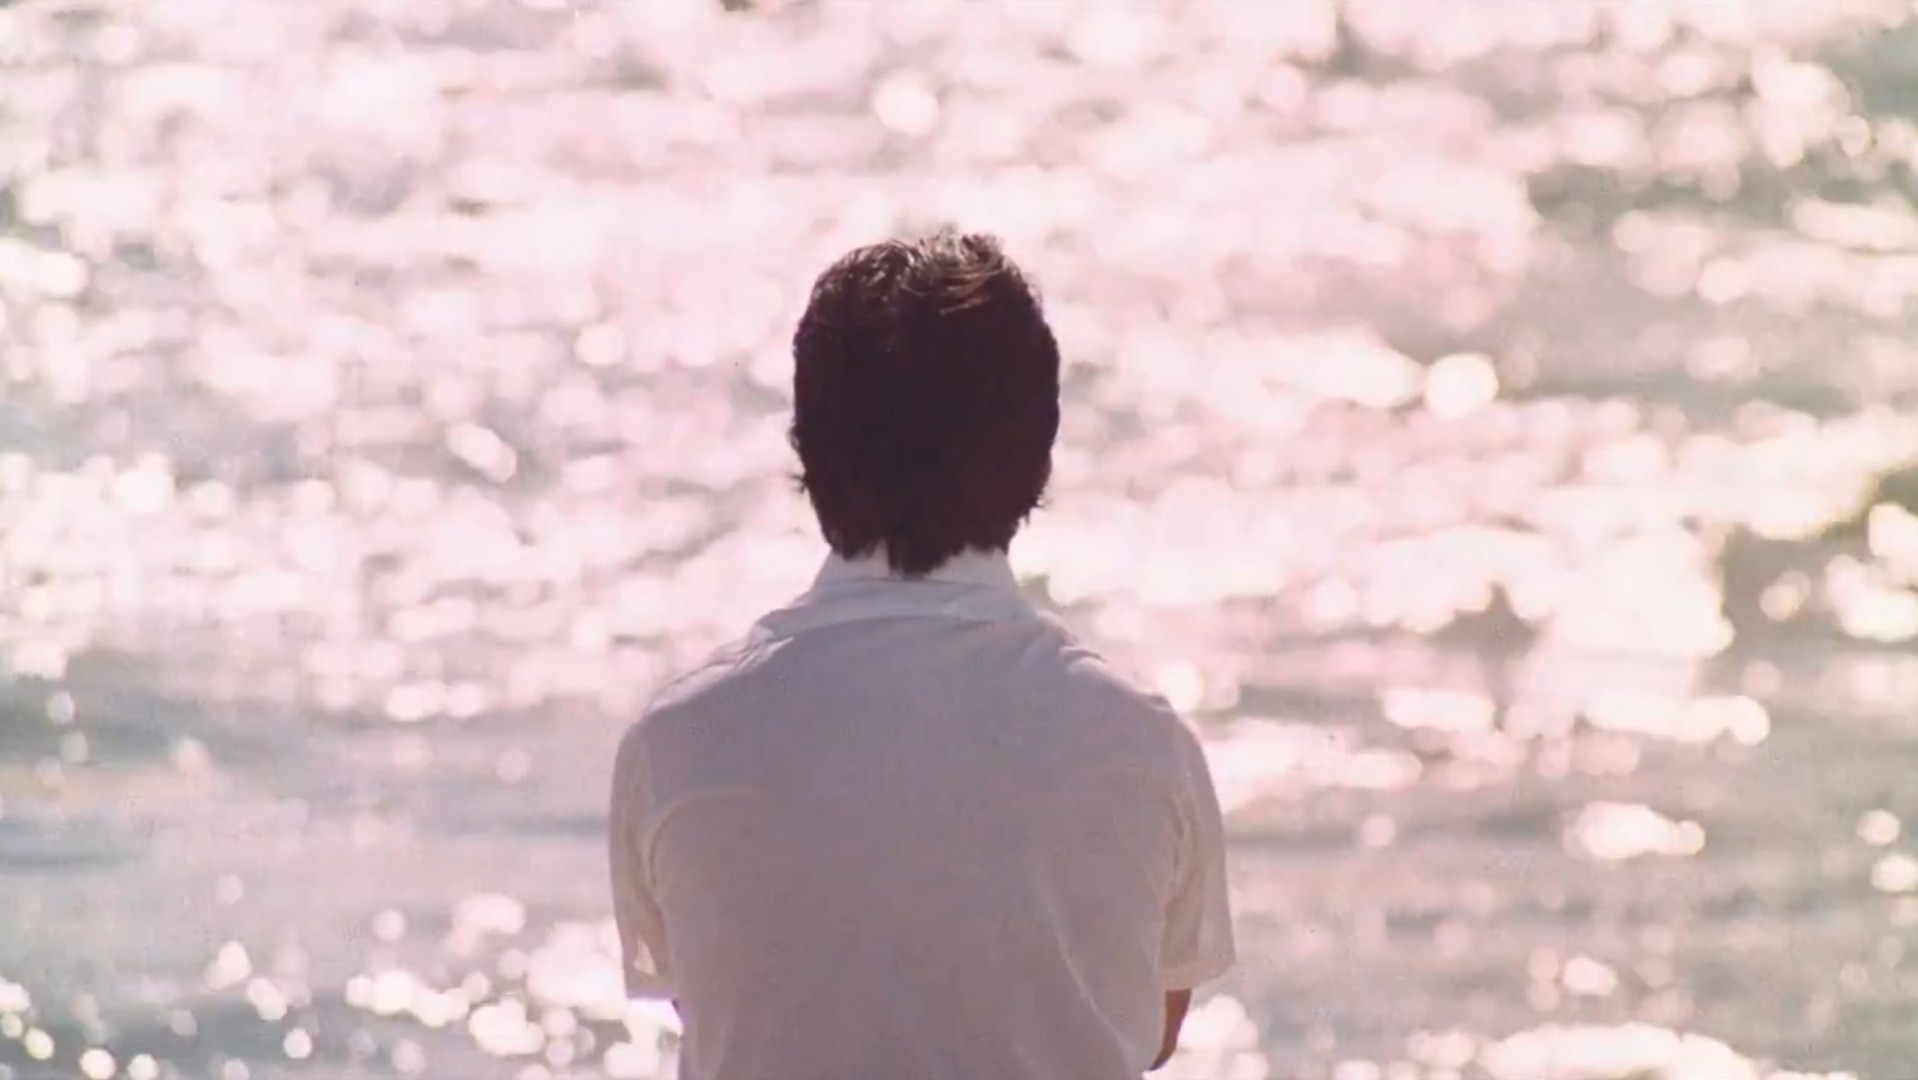 Rico Rizzo, a brown-haired man, sits in front of the ocean. His back faces us.